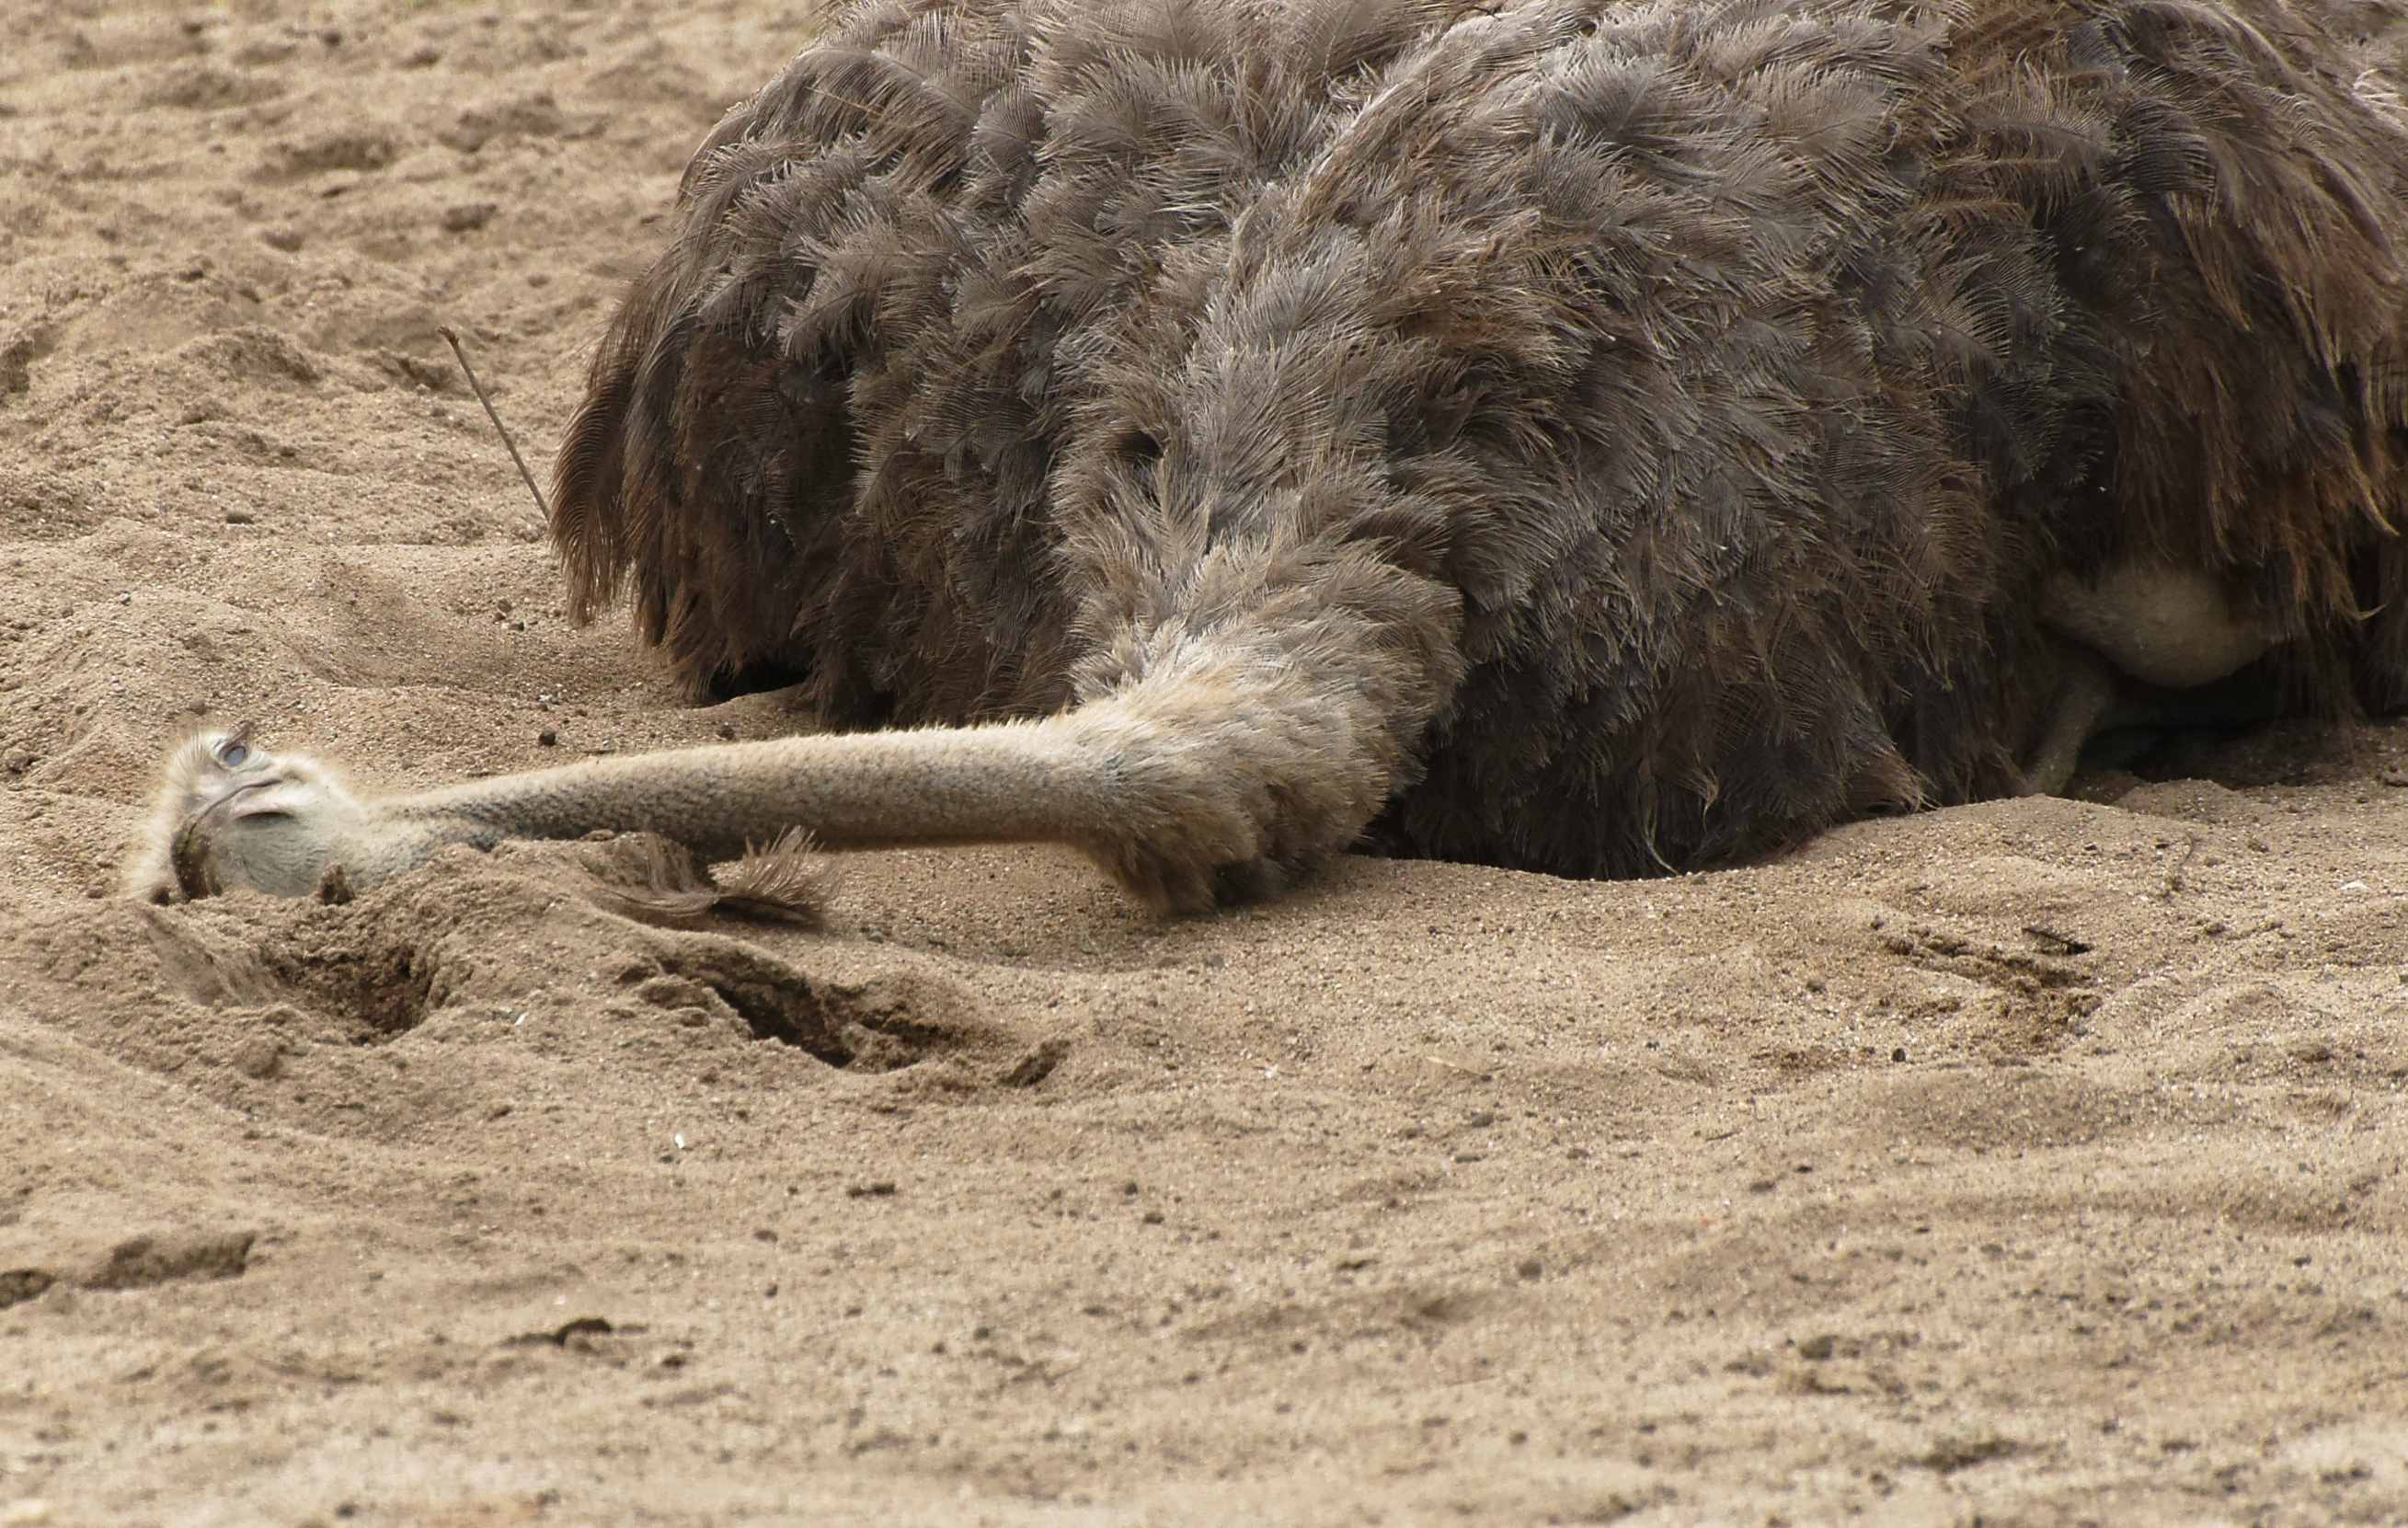 Ostriches Don't Hide Their Heads in the Sand